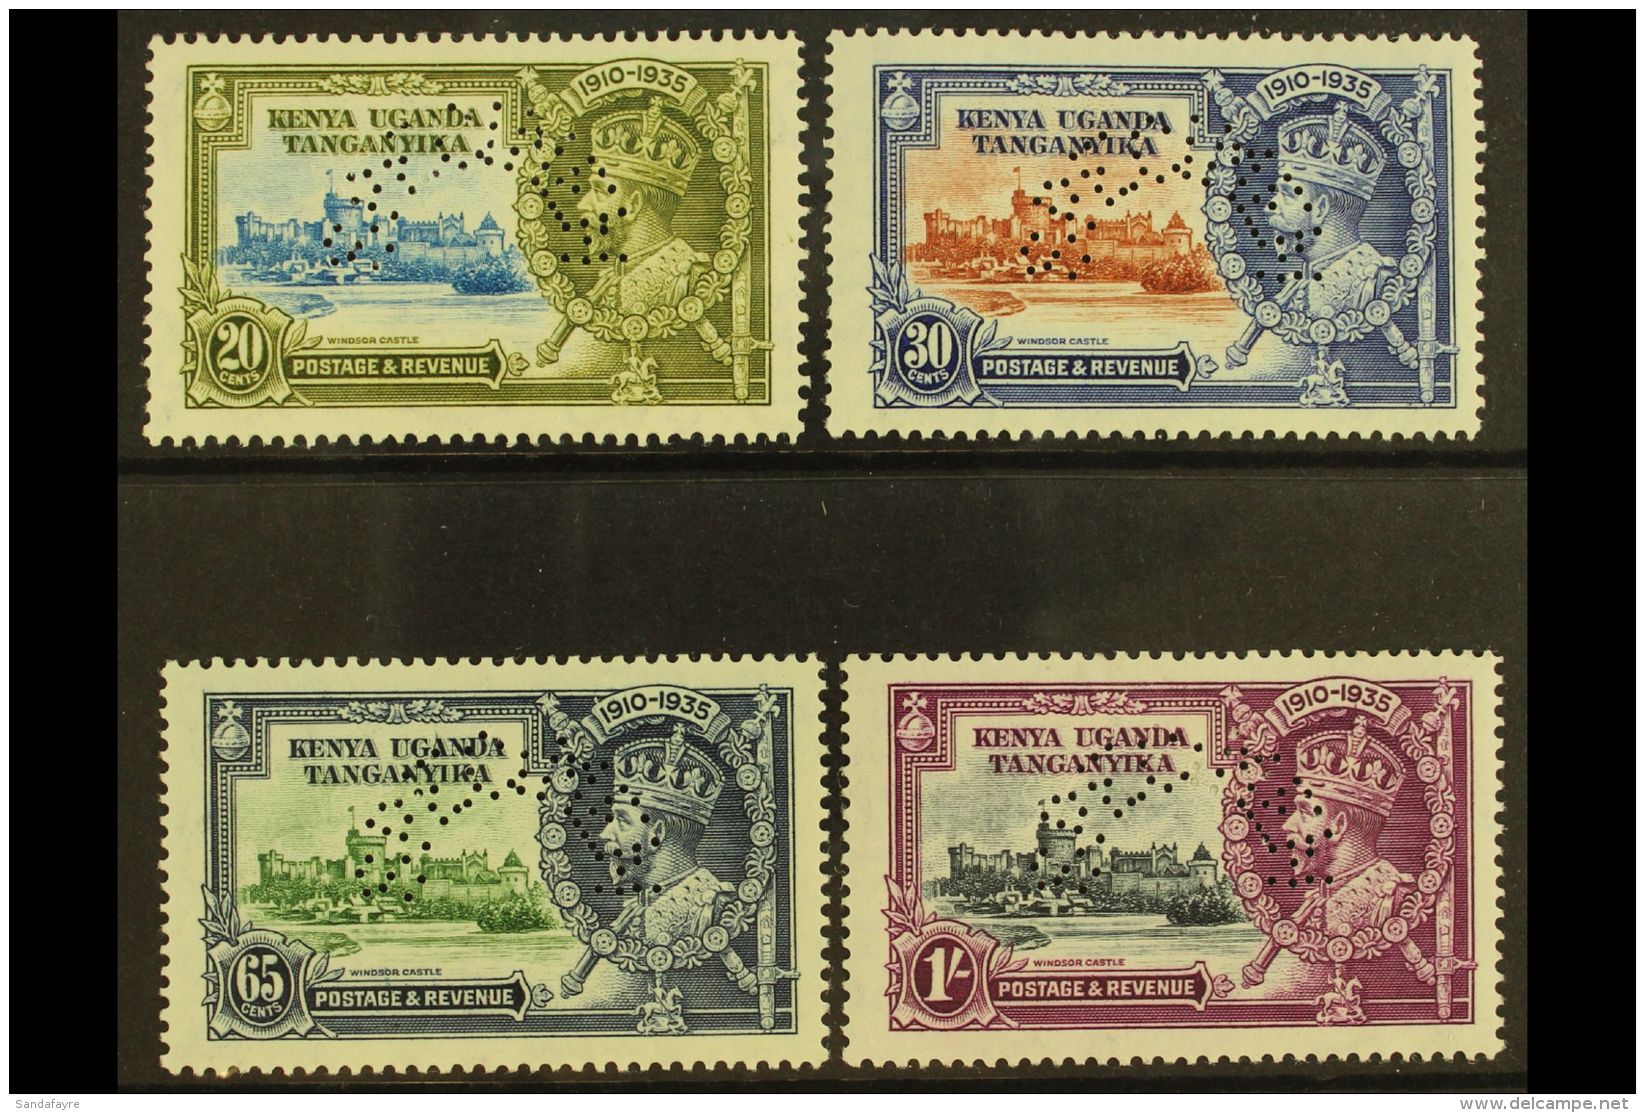 1935 Silver Jubilee Set Complete, Perforated "Specimen", SG 124s/7s, Very Fine Mint. (4 Stamps) For More Images,... - Vide